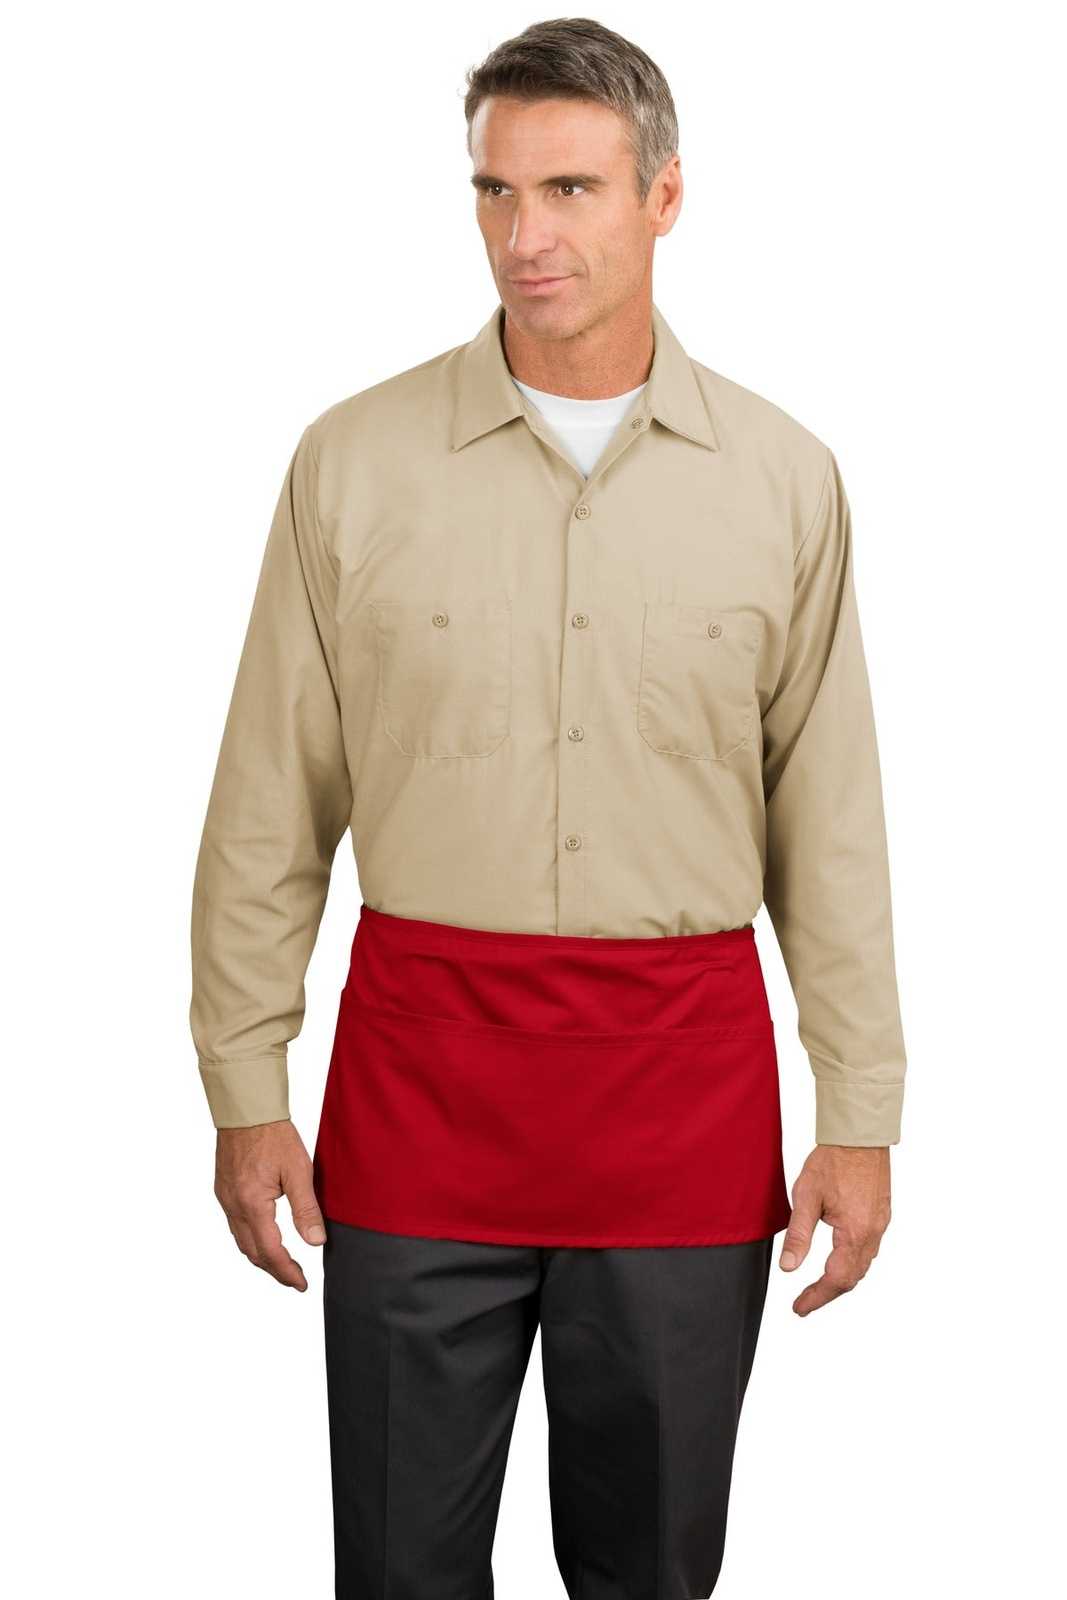 Port Authority A515 Waist Apron with Pockets - Red - HIT a Double - 1